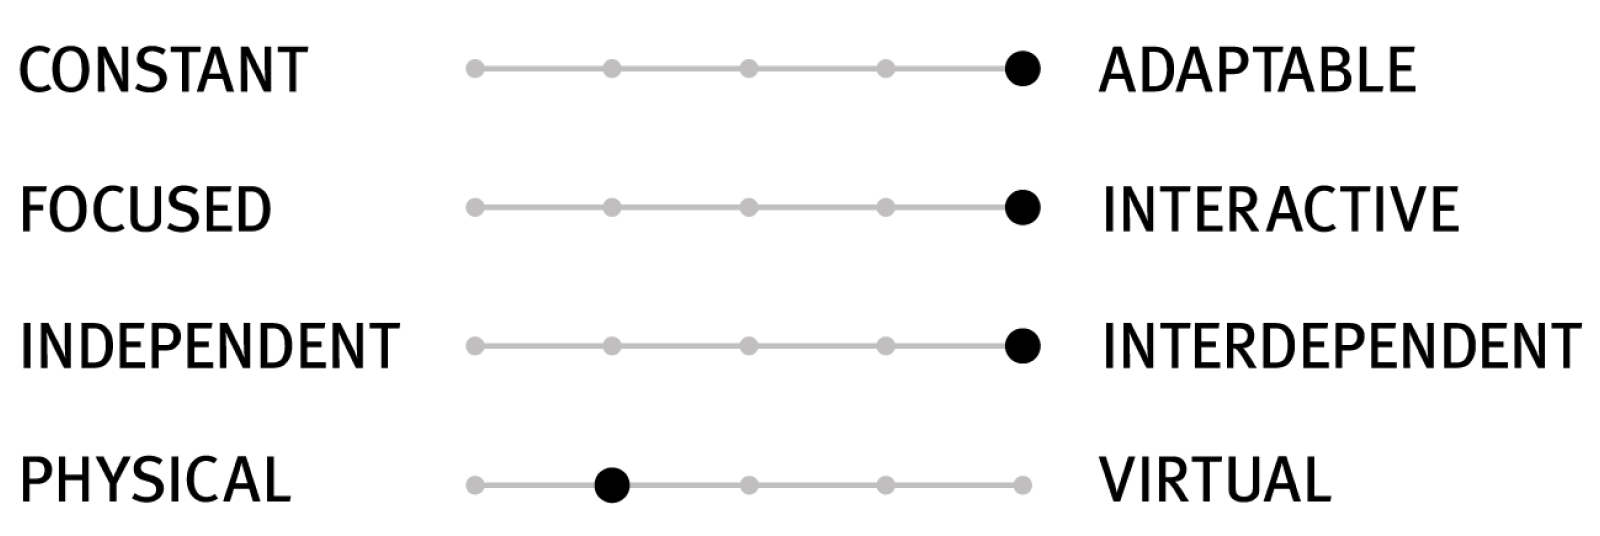 A scale with four sets of sliders that indicate the design characteristics of a setting. These sliders indicate a high level of adaptability, interactivity, and interdependence, with an emphasis on supporting team members who are physically present in the space.